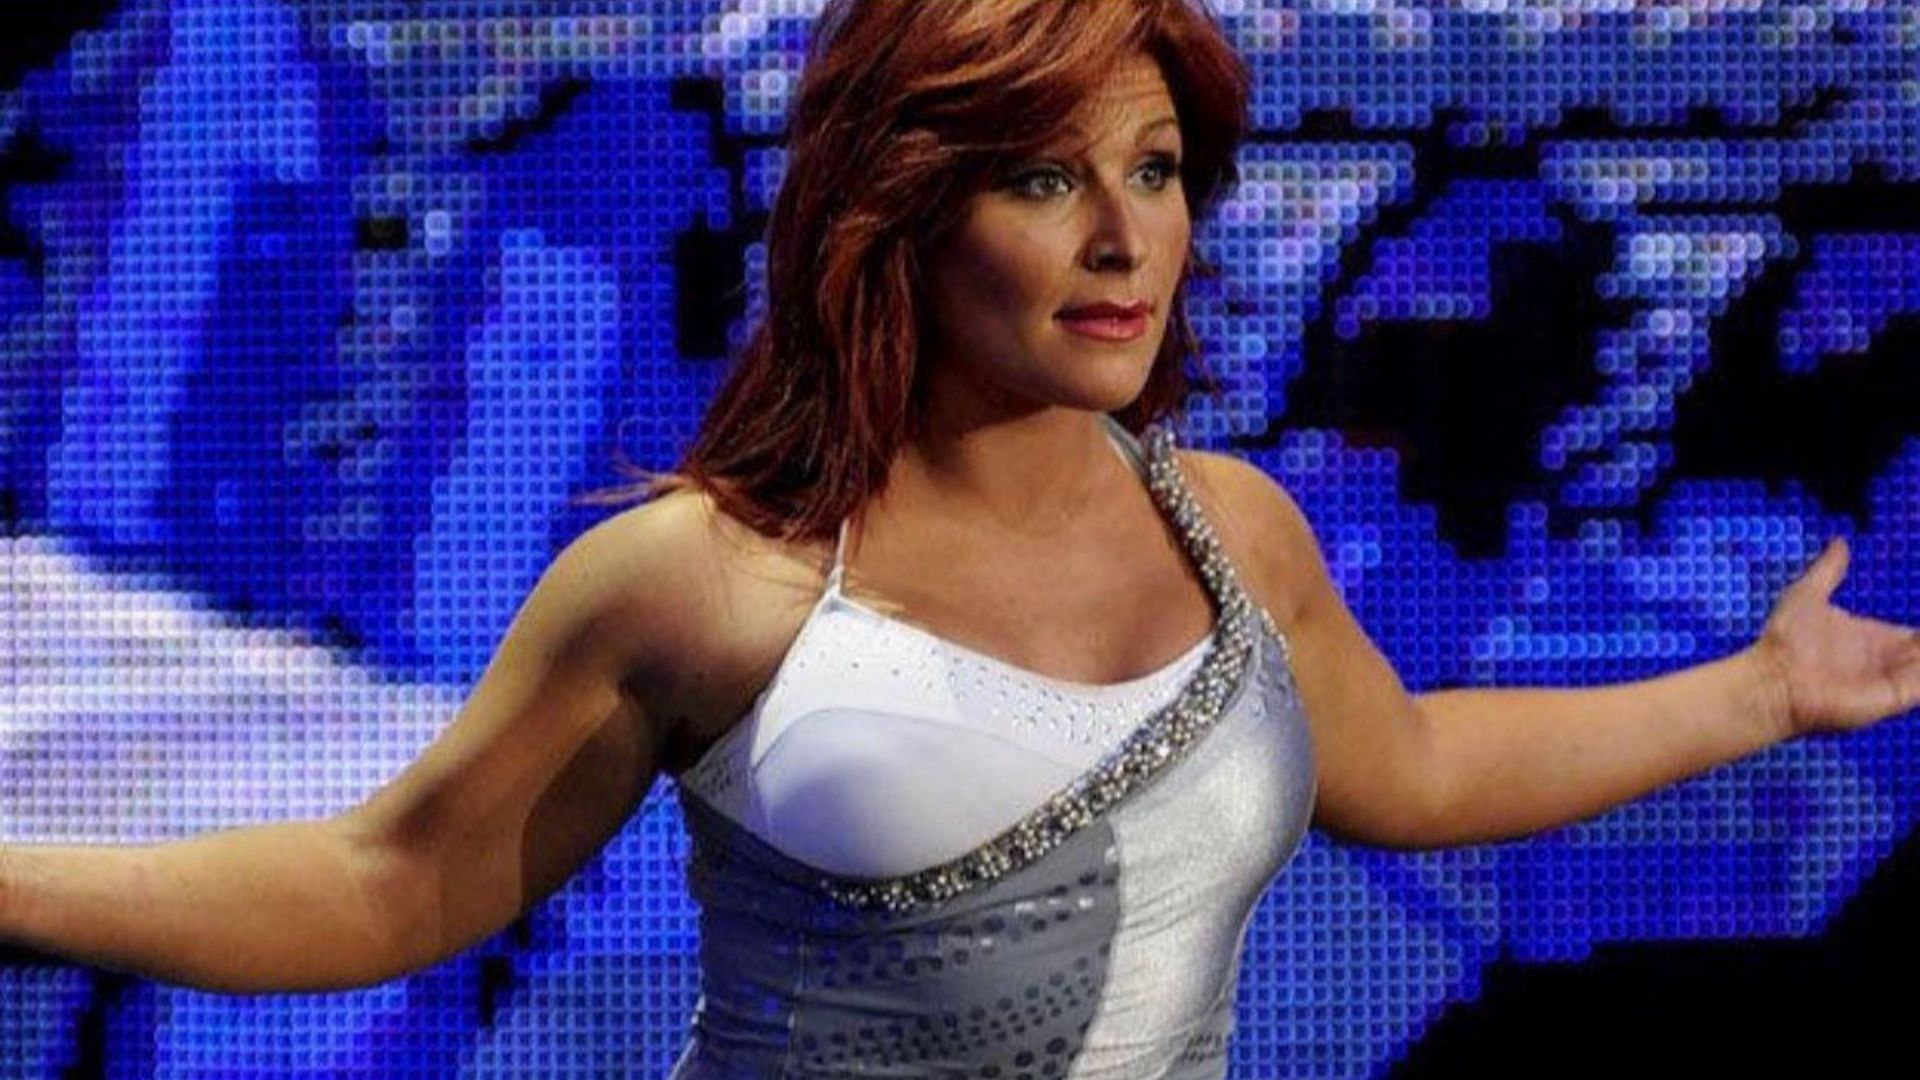 Natalya had to dye her hair red in 2008